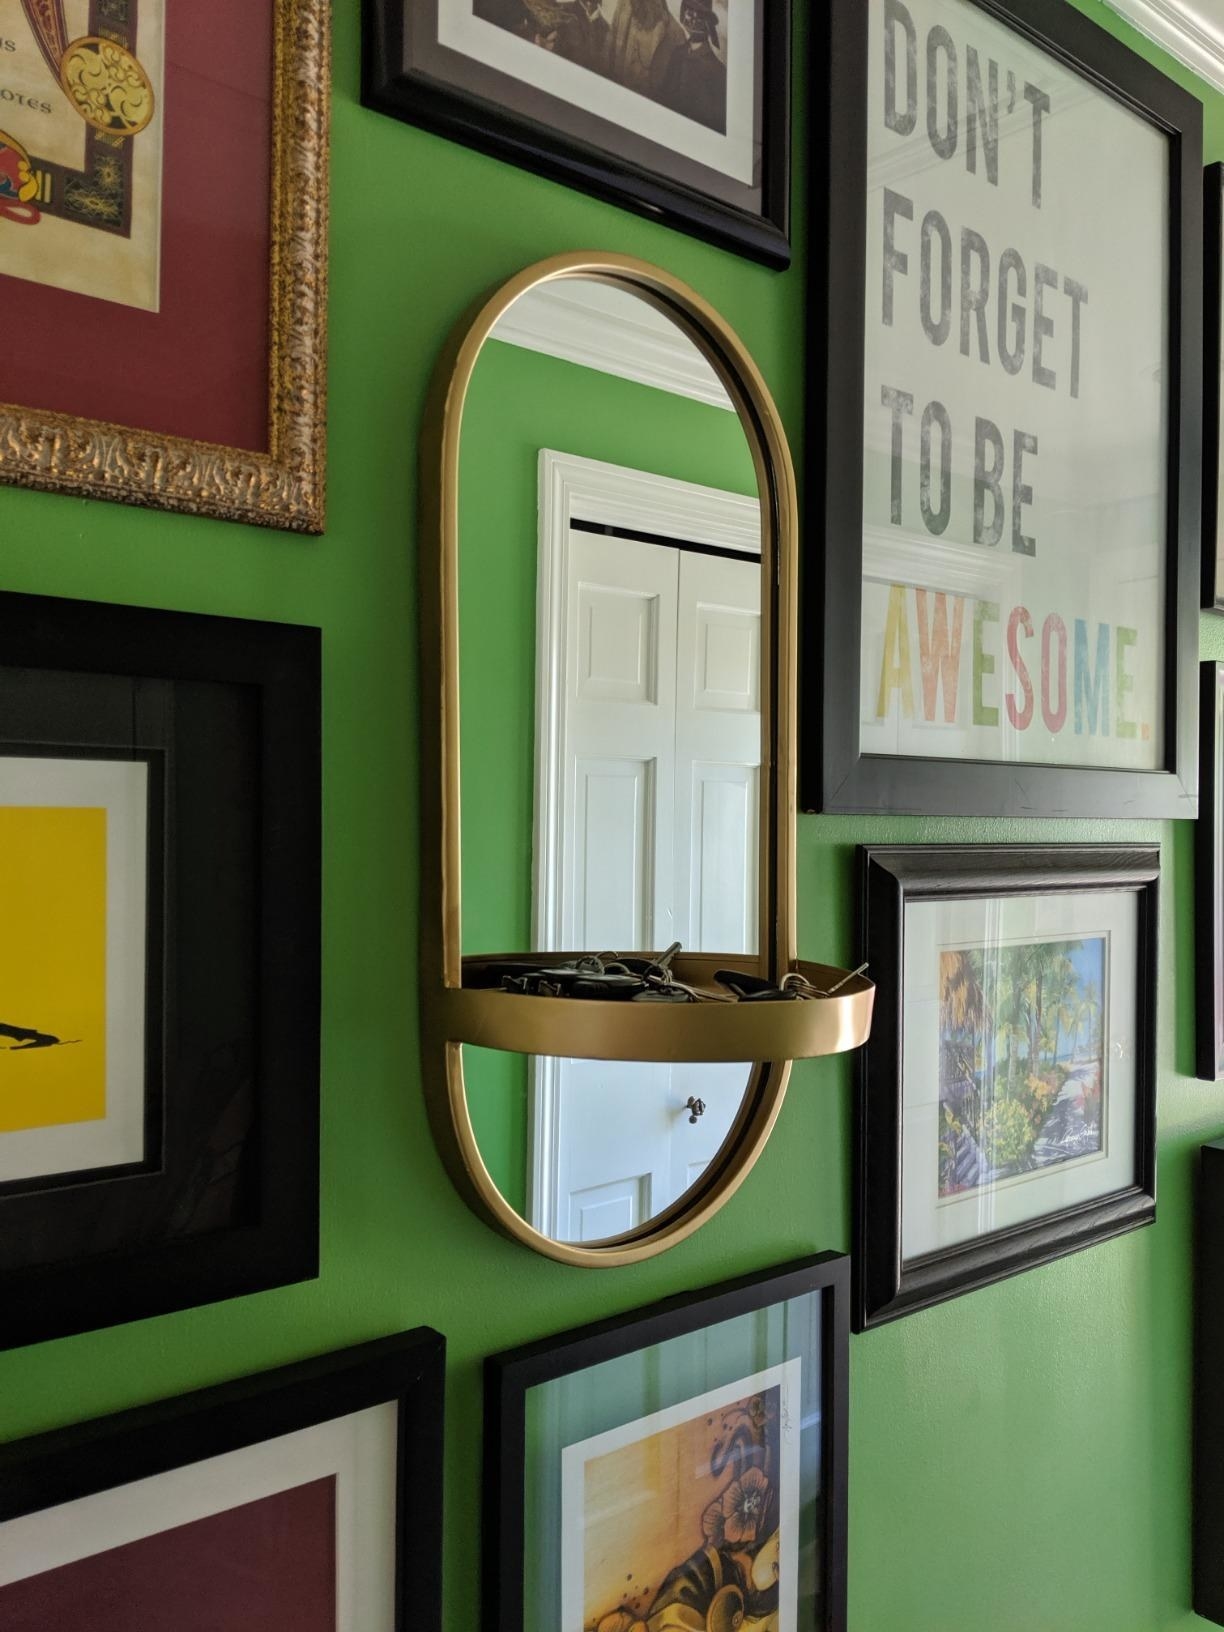 Reviewer's wall mounted mirror is shown